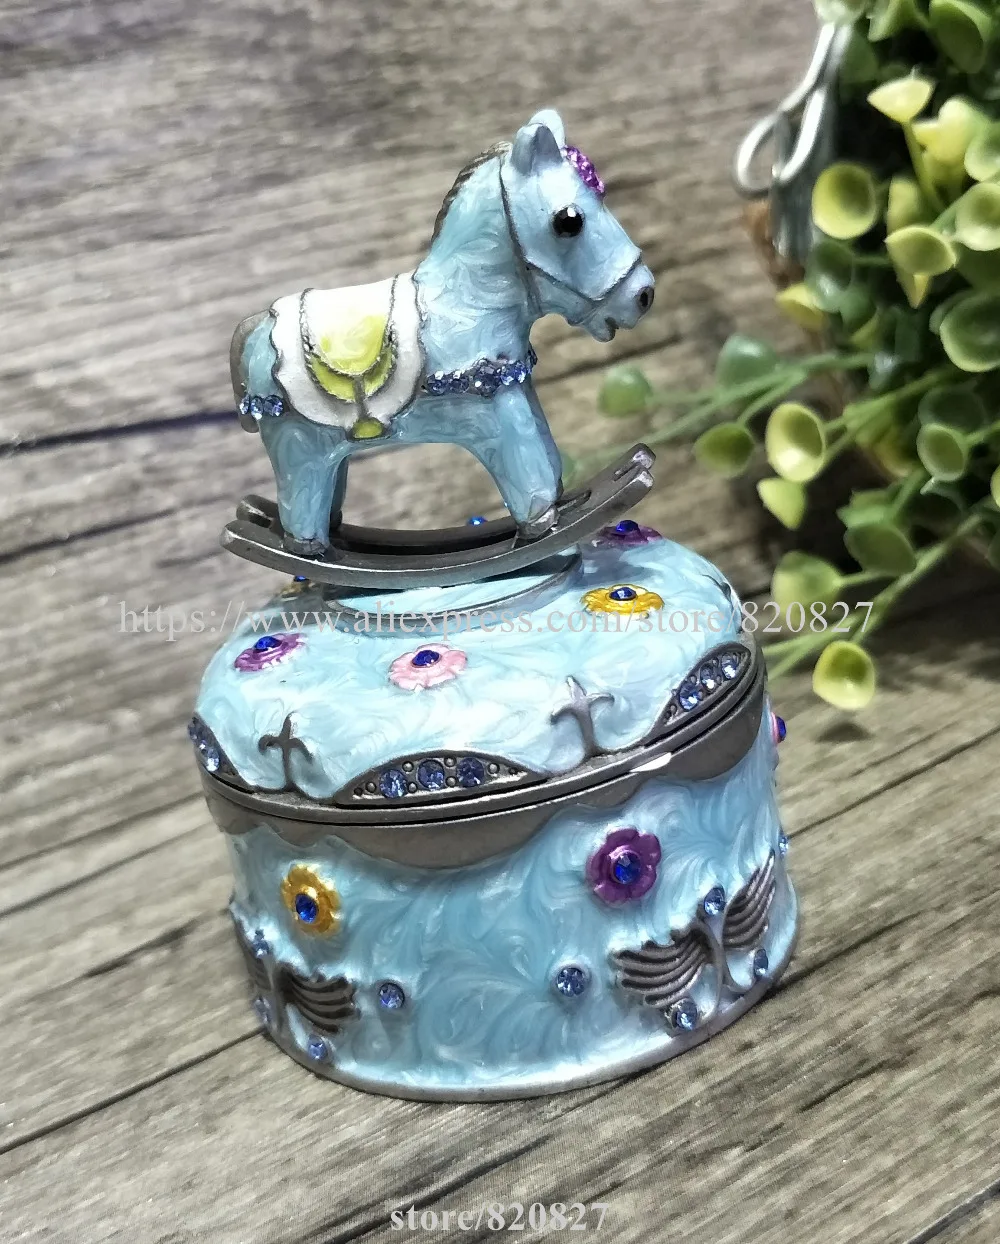 Small Cute Horse on Lid Jewelled Trinket Box Jewelry Box Newest Ring Holder Earring Jewelry Round Storage Box Wedding Souvenirs newest jewelry box for necklace and ring bracelet stud earring storage organizer gift packaging box case шкатулка для украшений